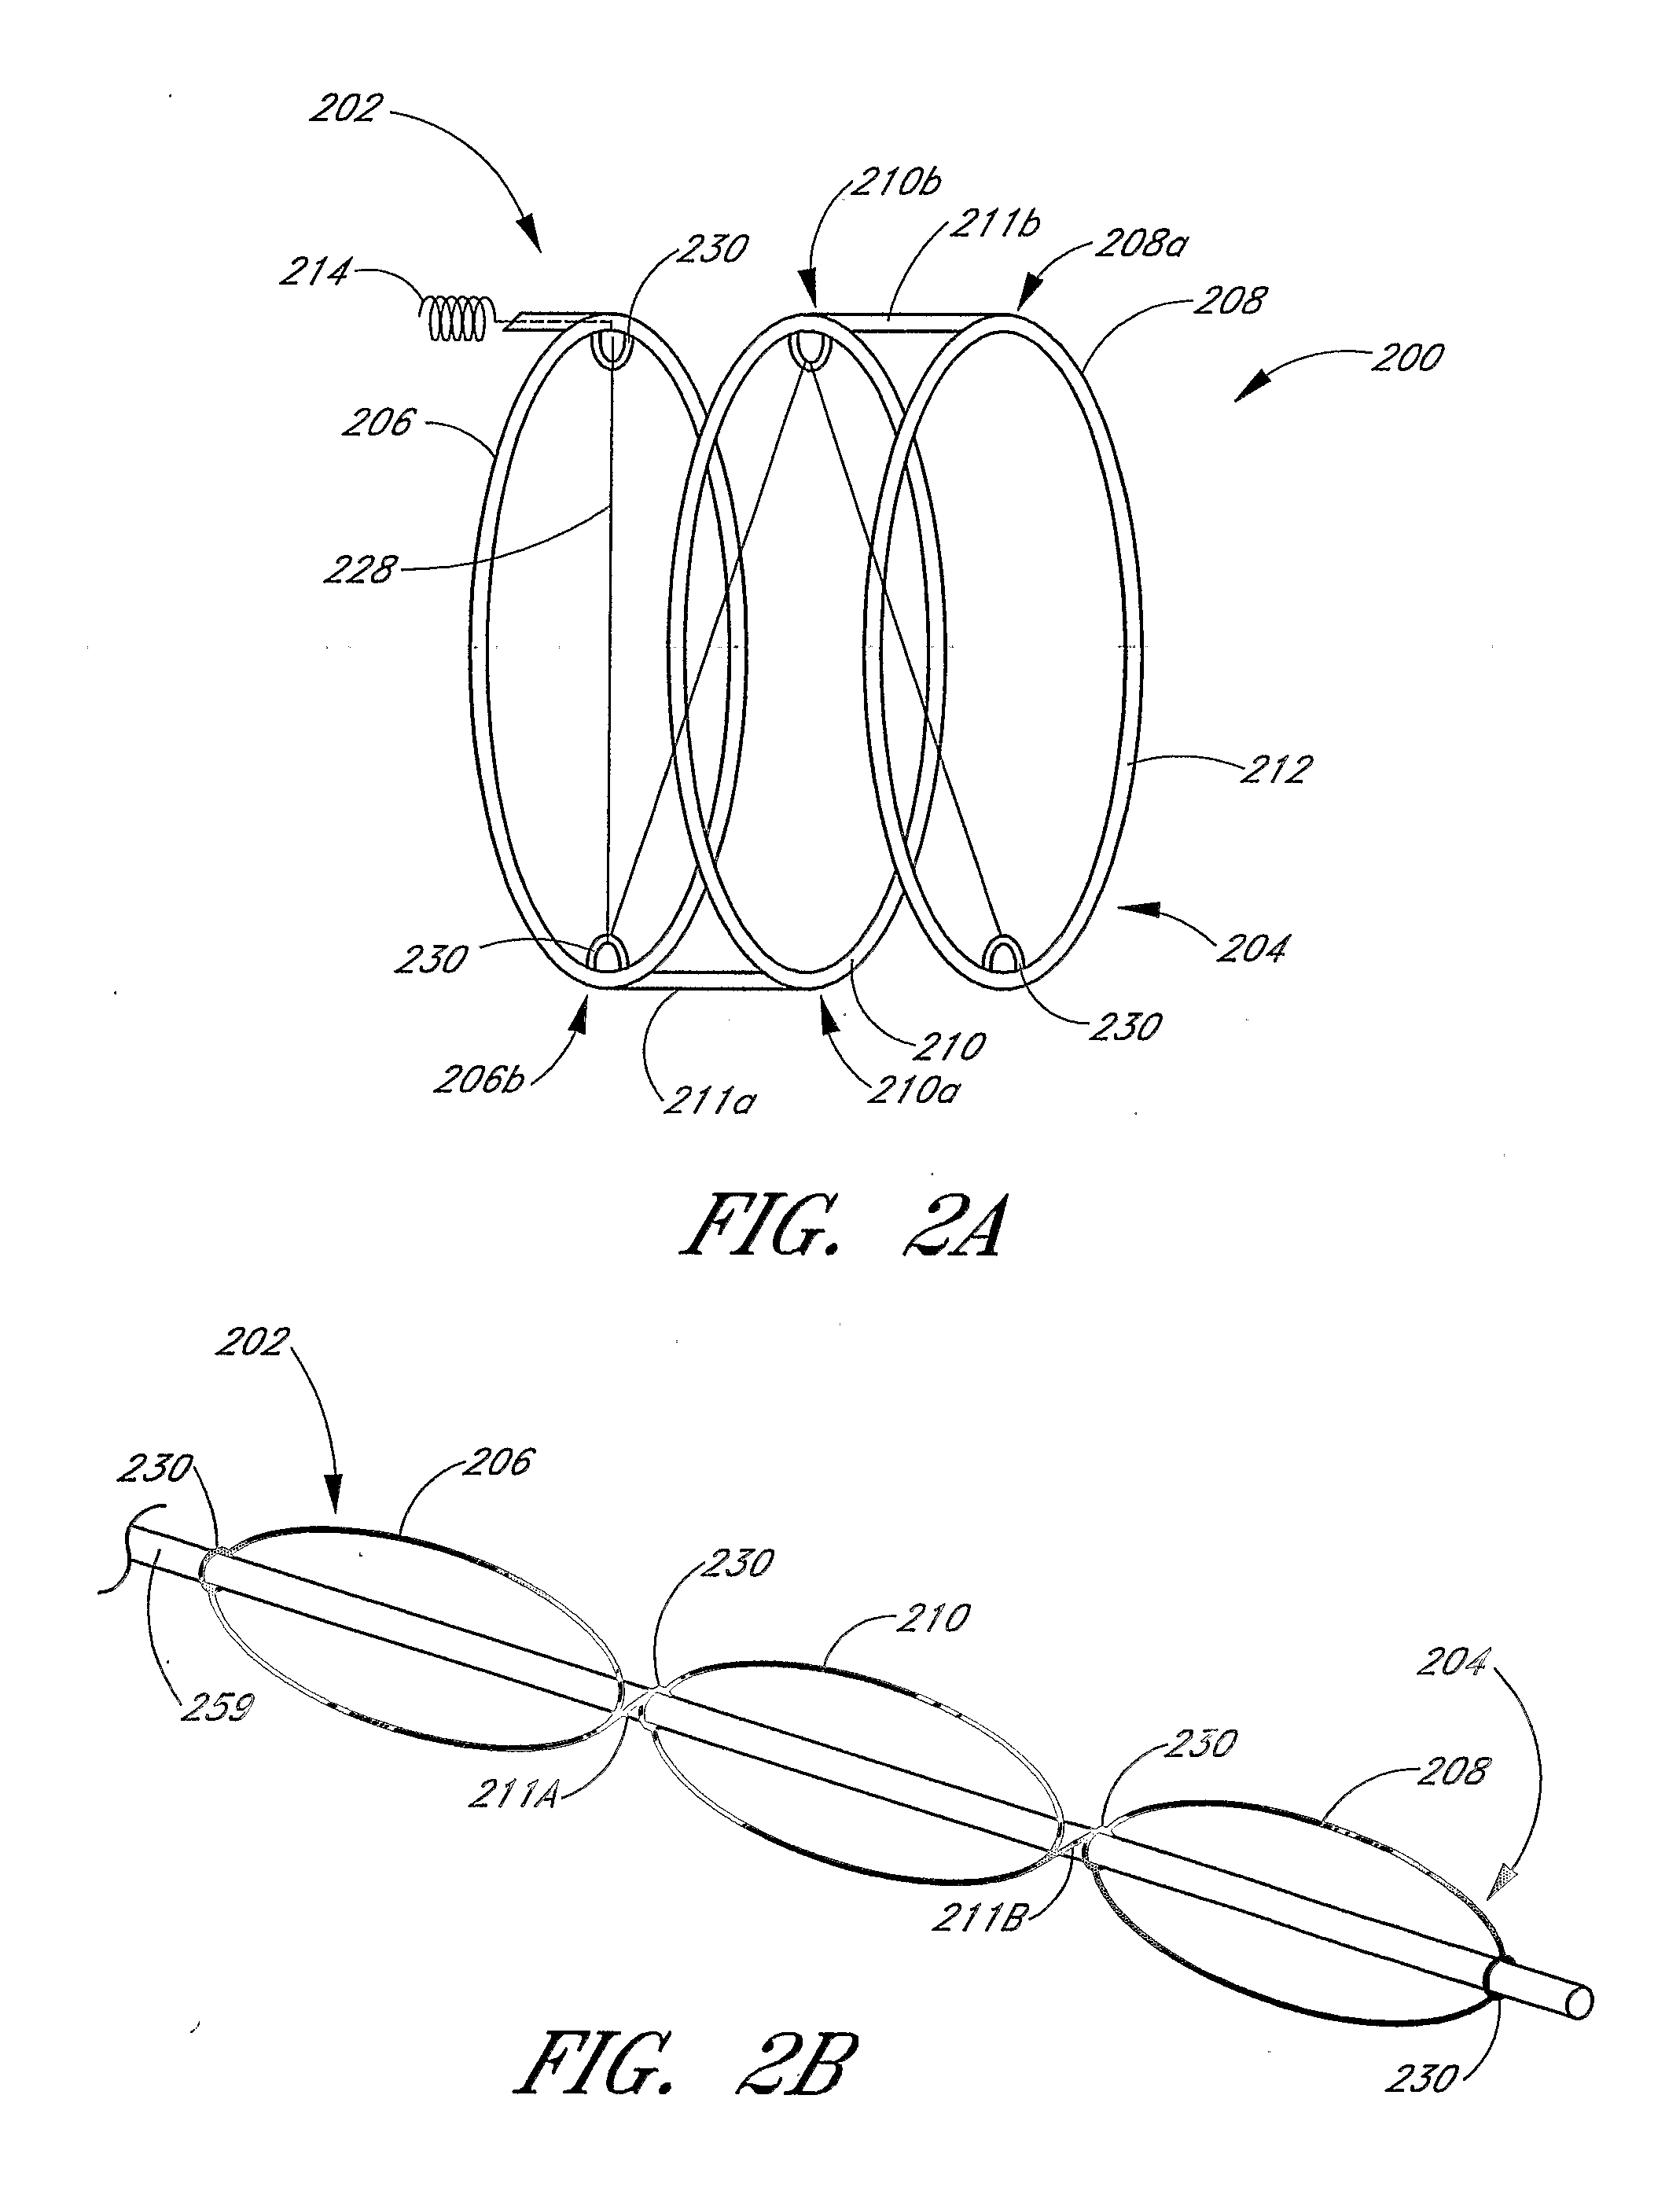 Diode-pumped microlasers including resonator microchips and methods for producing the same